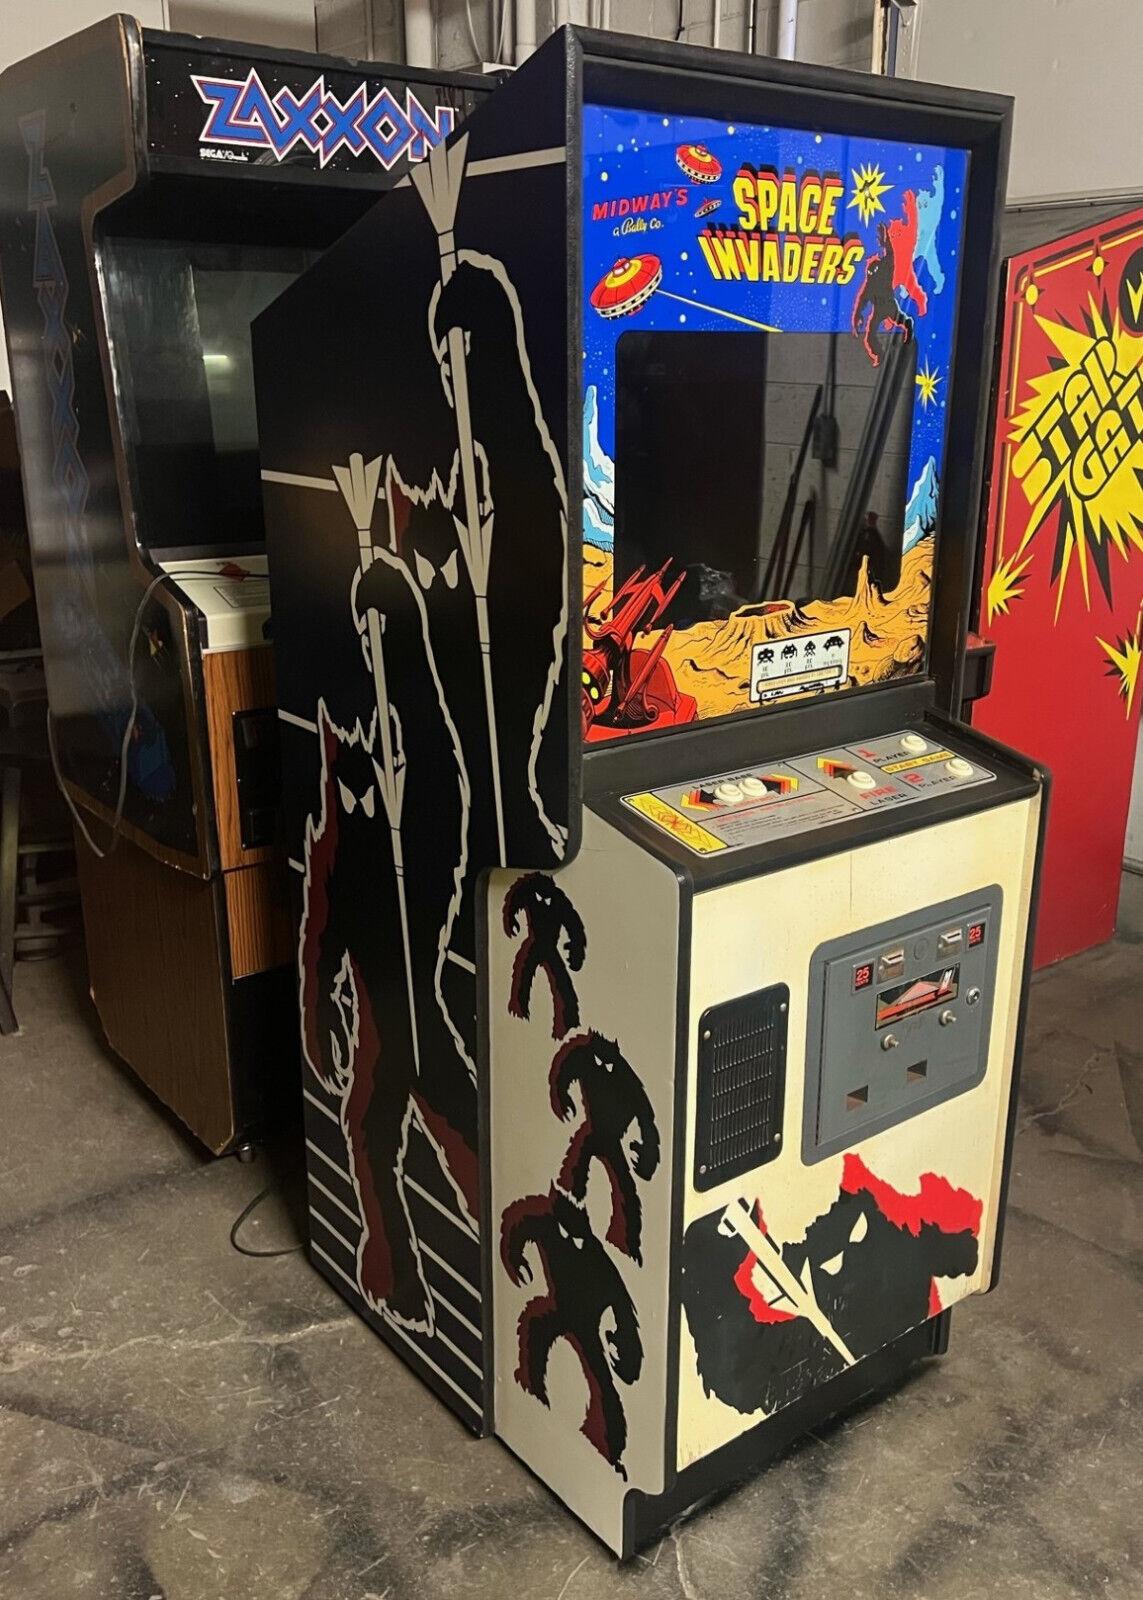 SPACE INVADERS ARCADE MACHINE by MIDWAY 1978 (Excellent Condition) *RARE*